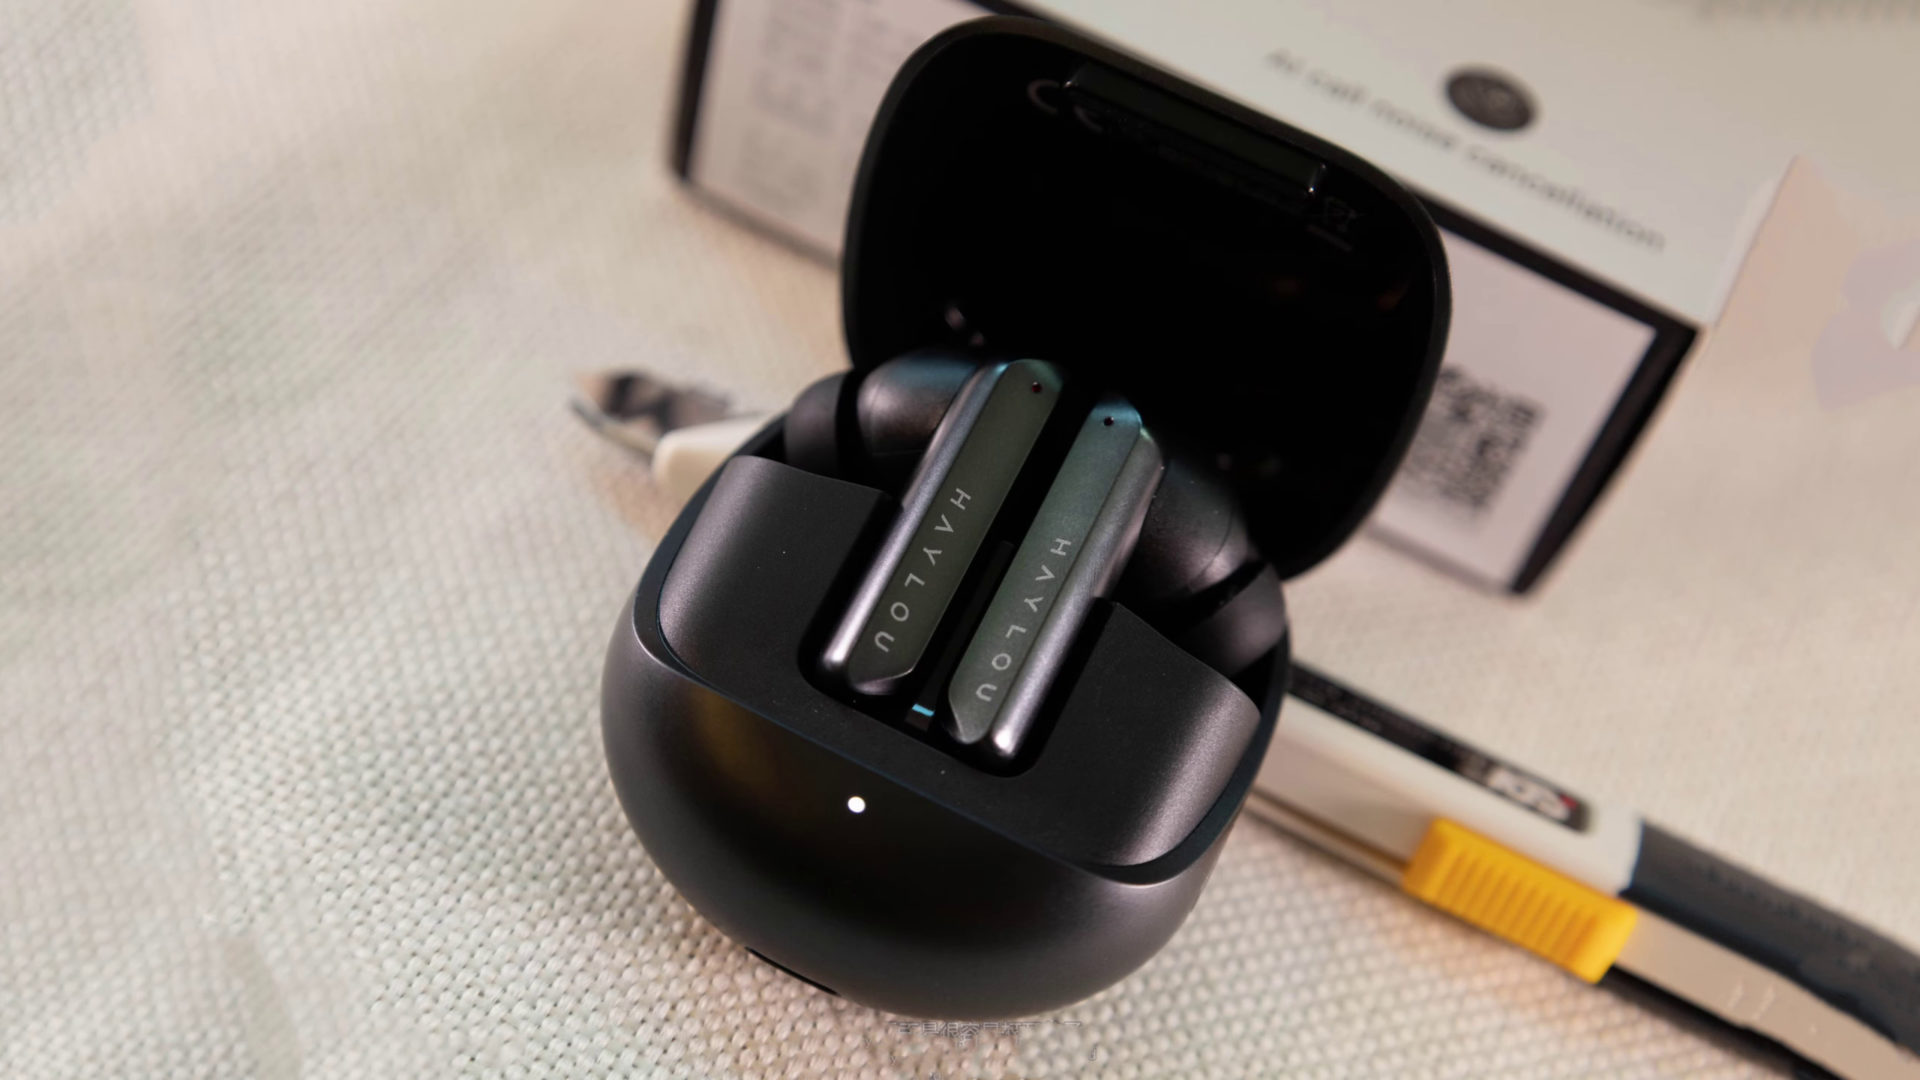 Haylou X1 Pro Earbuds Review